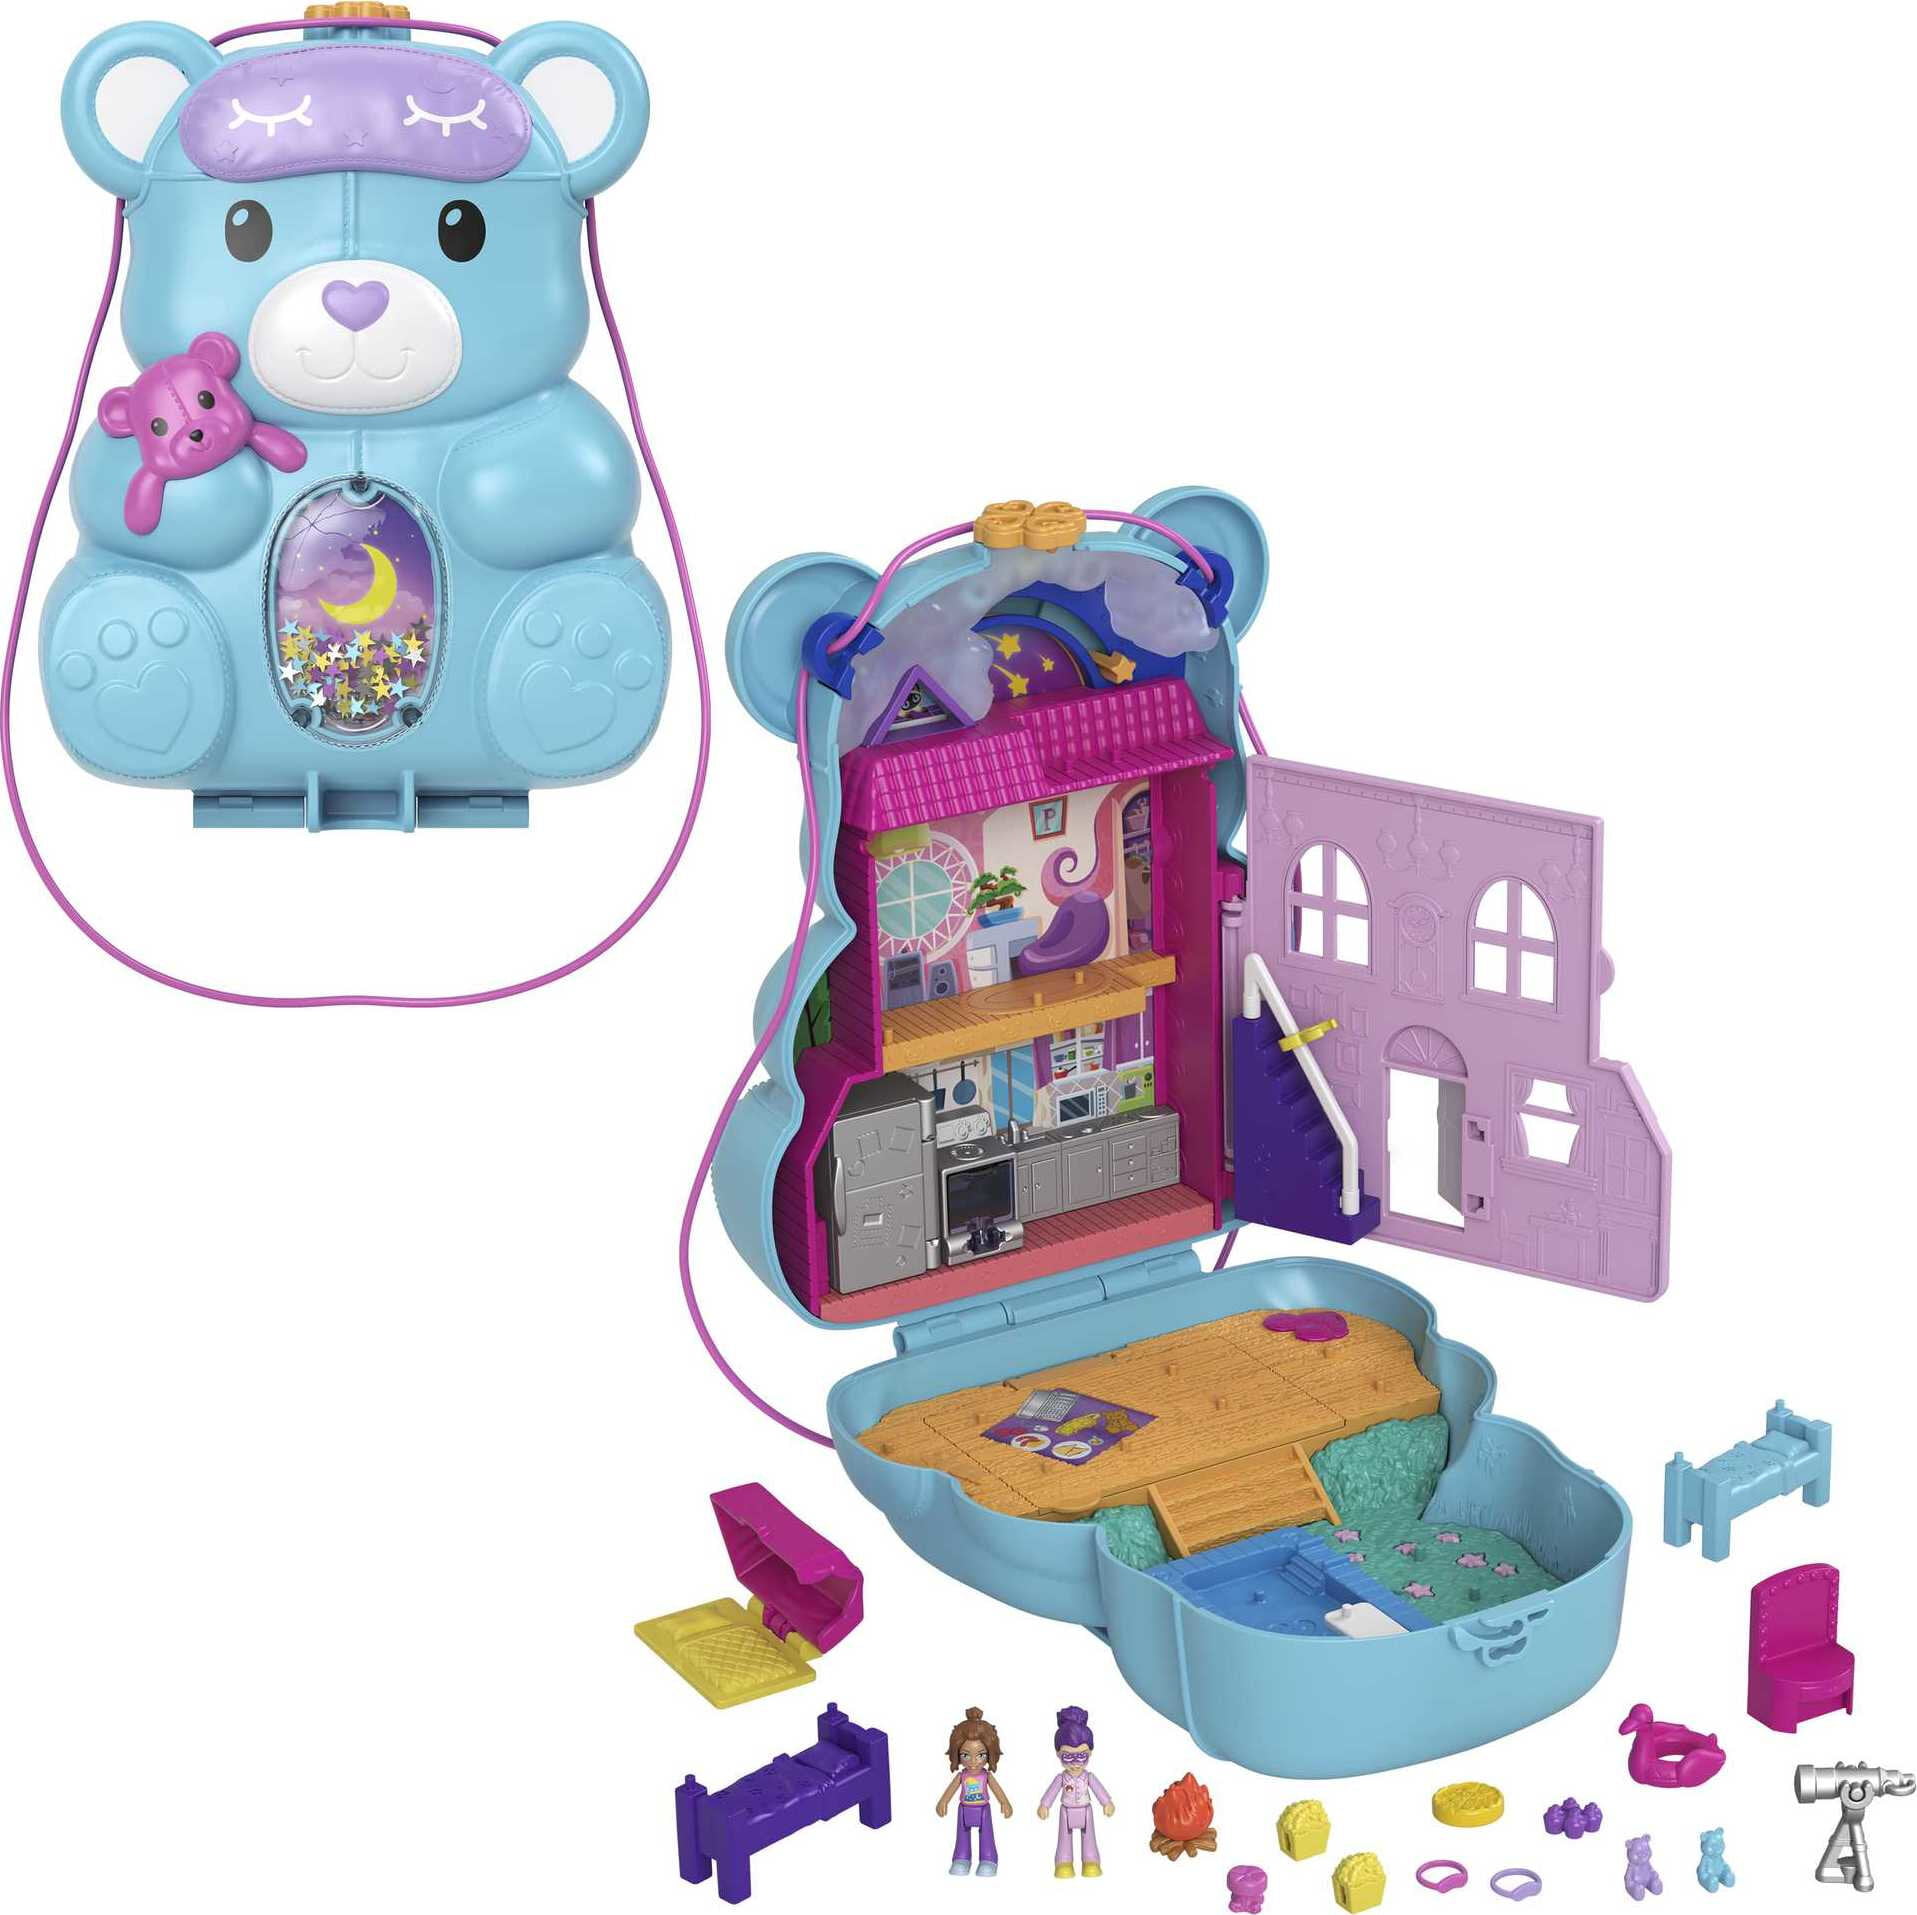 Polly Pocket 2-in-1 Teddy Bear Purse Travel Toy with 2 Micro Dolls and 16 Accessories